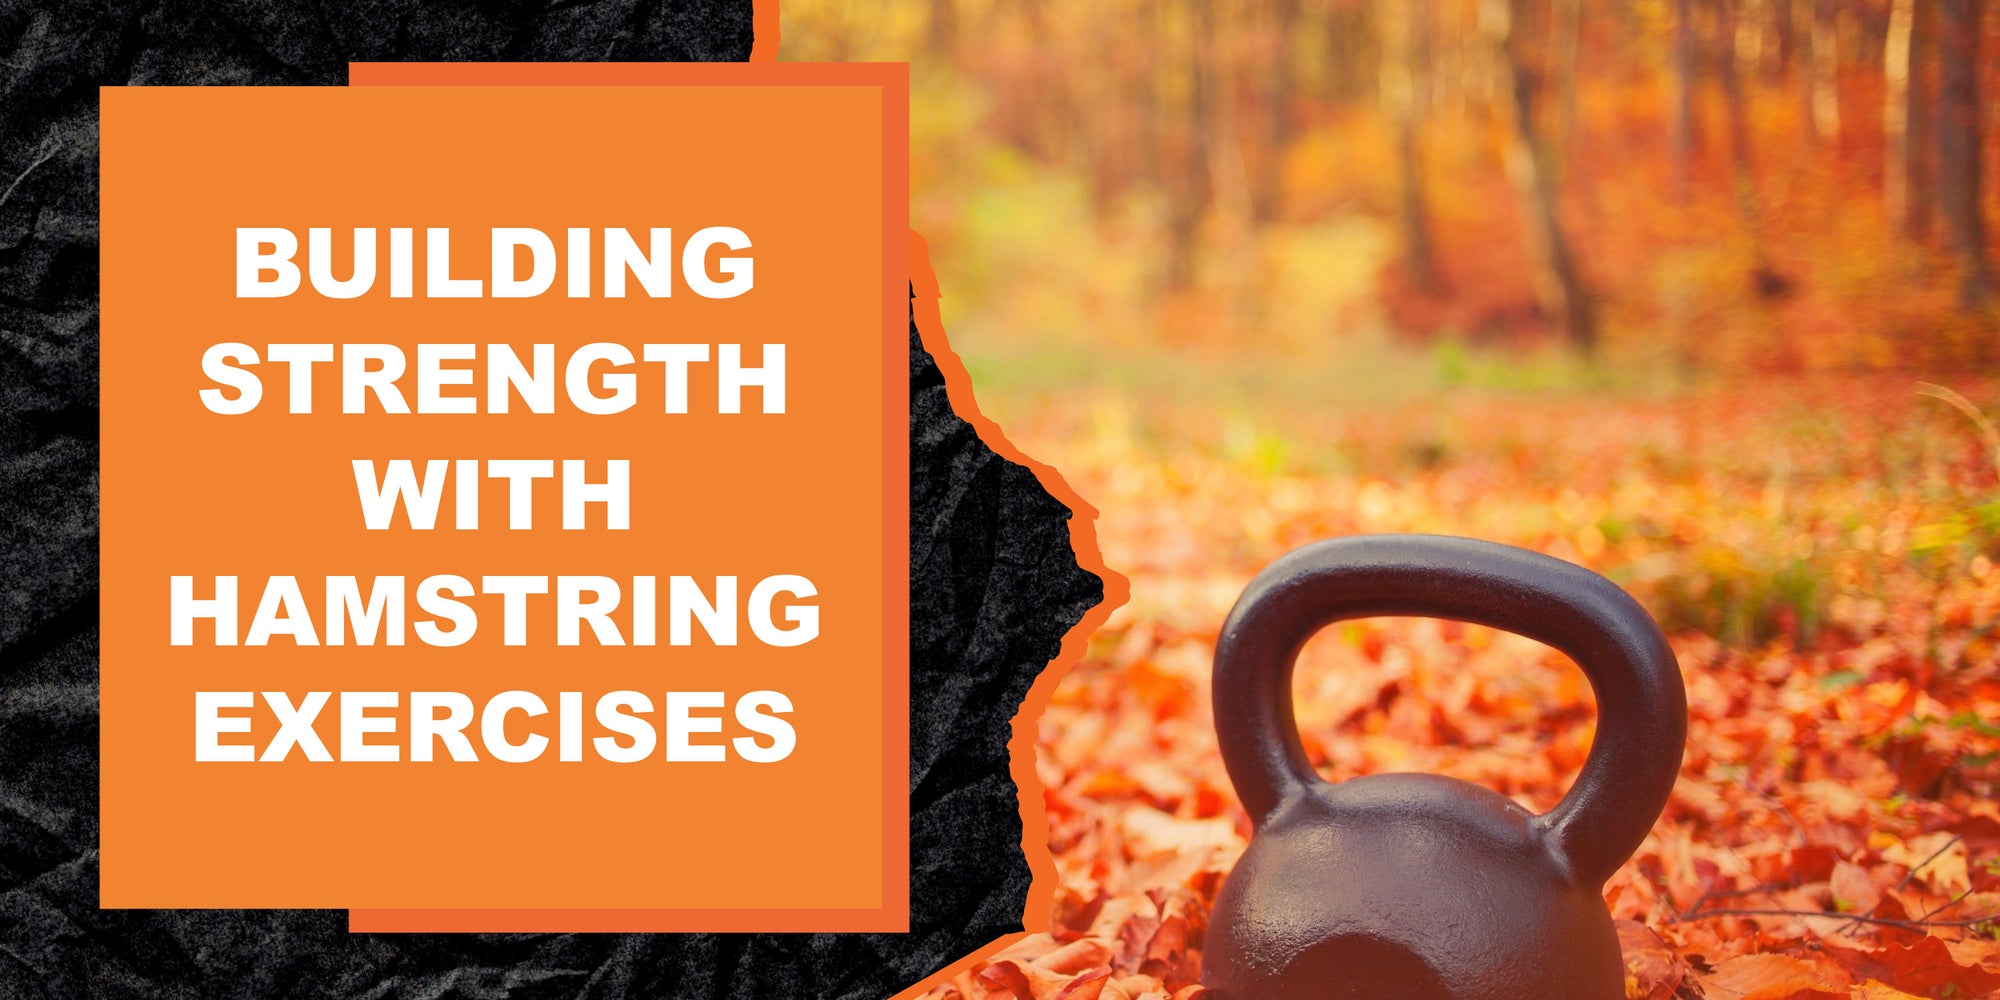 Building Strength with Hamstring Exercises